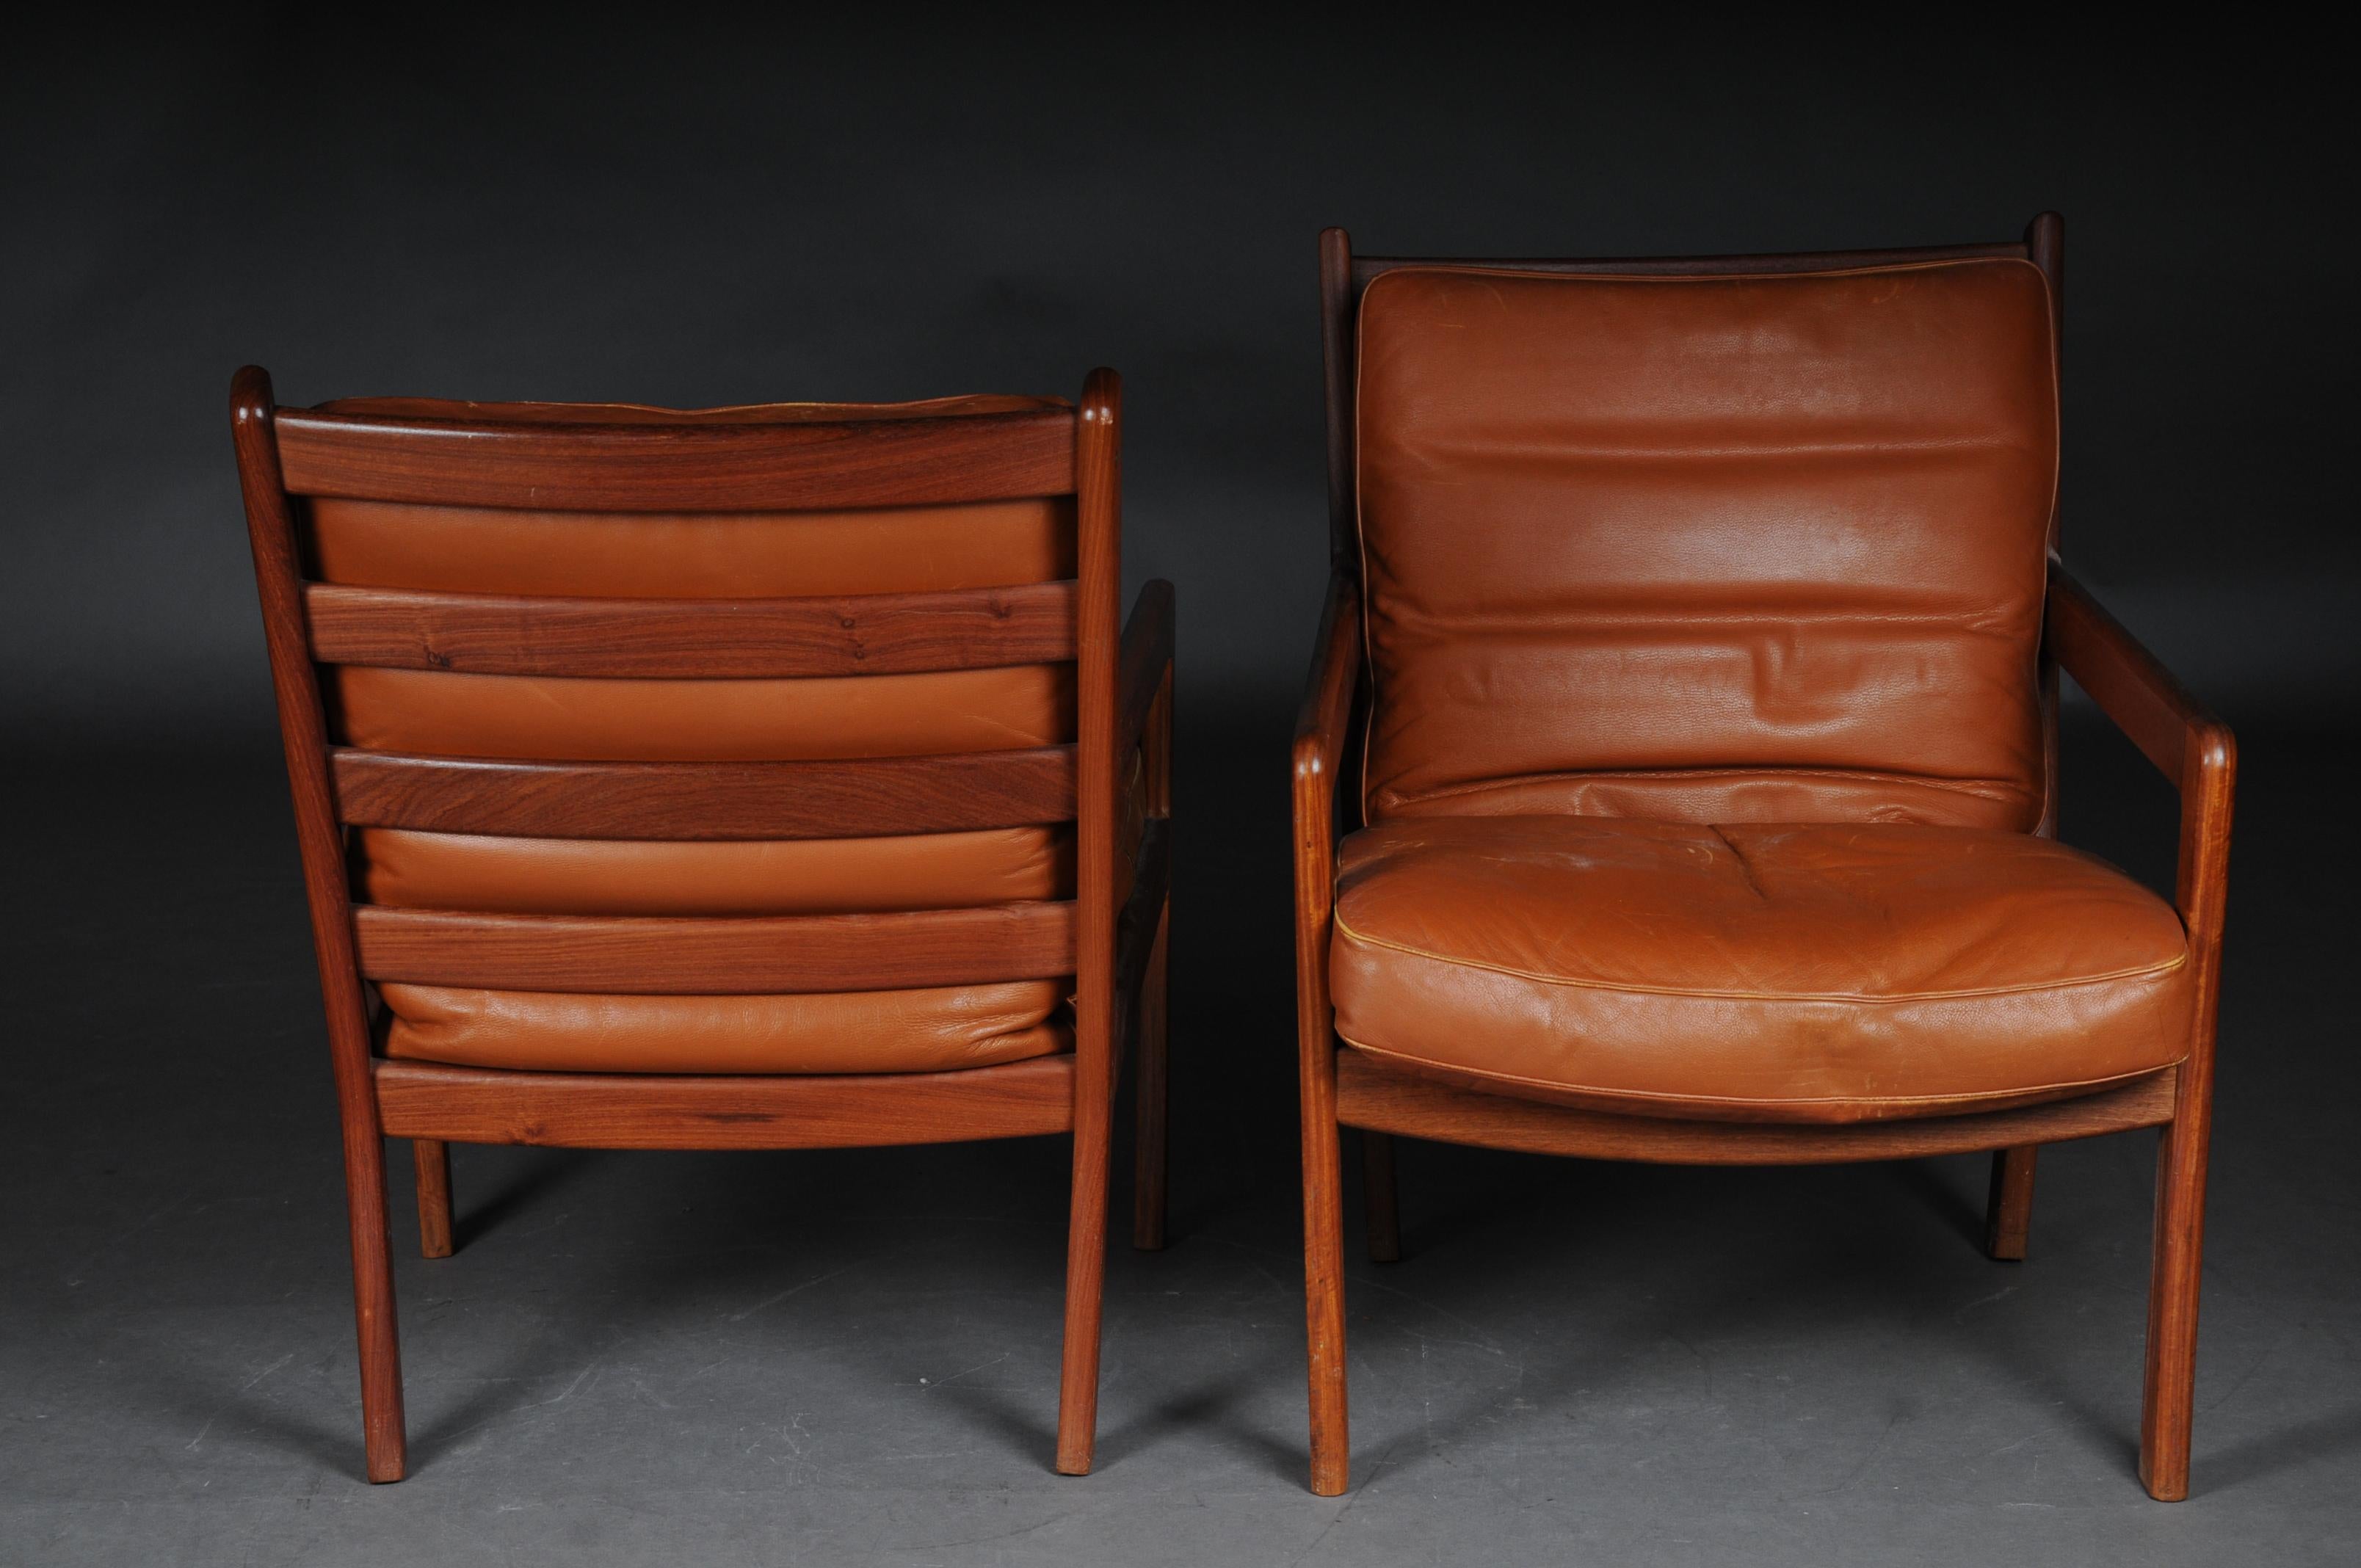 Pair of vintage teak armchairs, chairs 60s / 70s, Danish

Solid teak, simple and extremely comfortable armchair. Probably from the 60s / 70s
The upholstered chair, convincing by its simple elegance, was originally based on the design of the